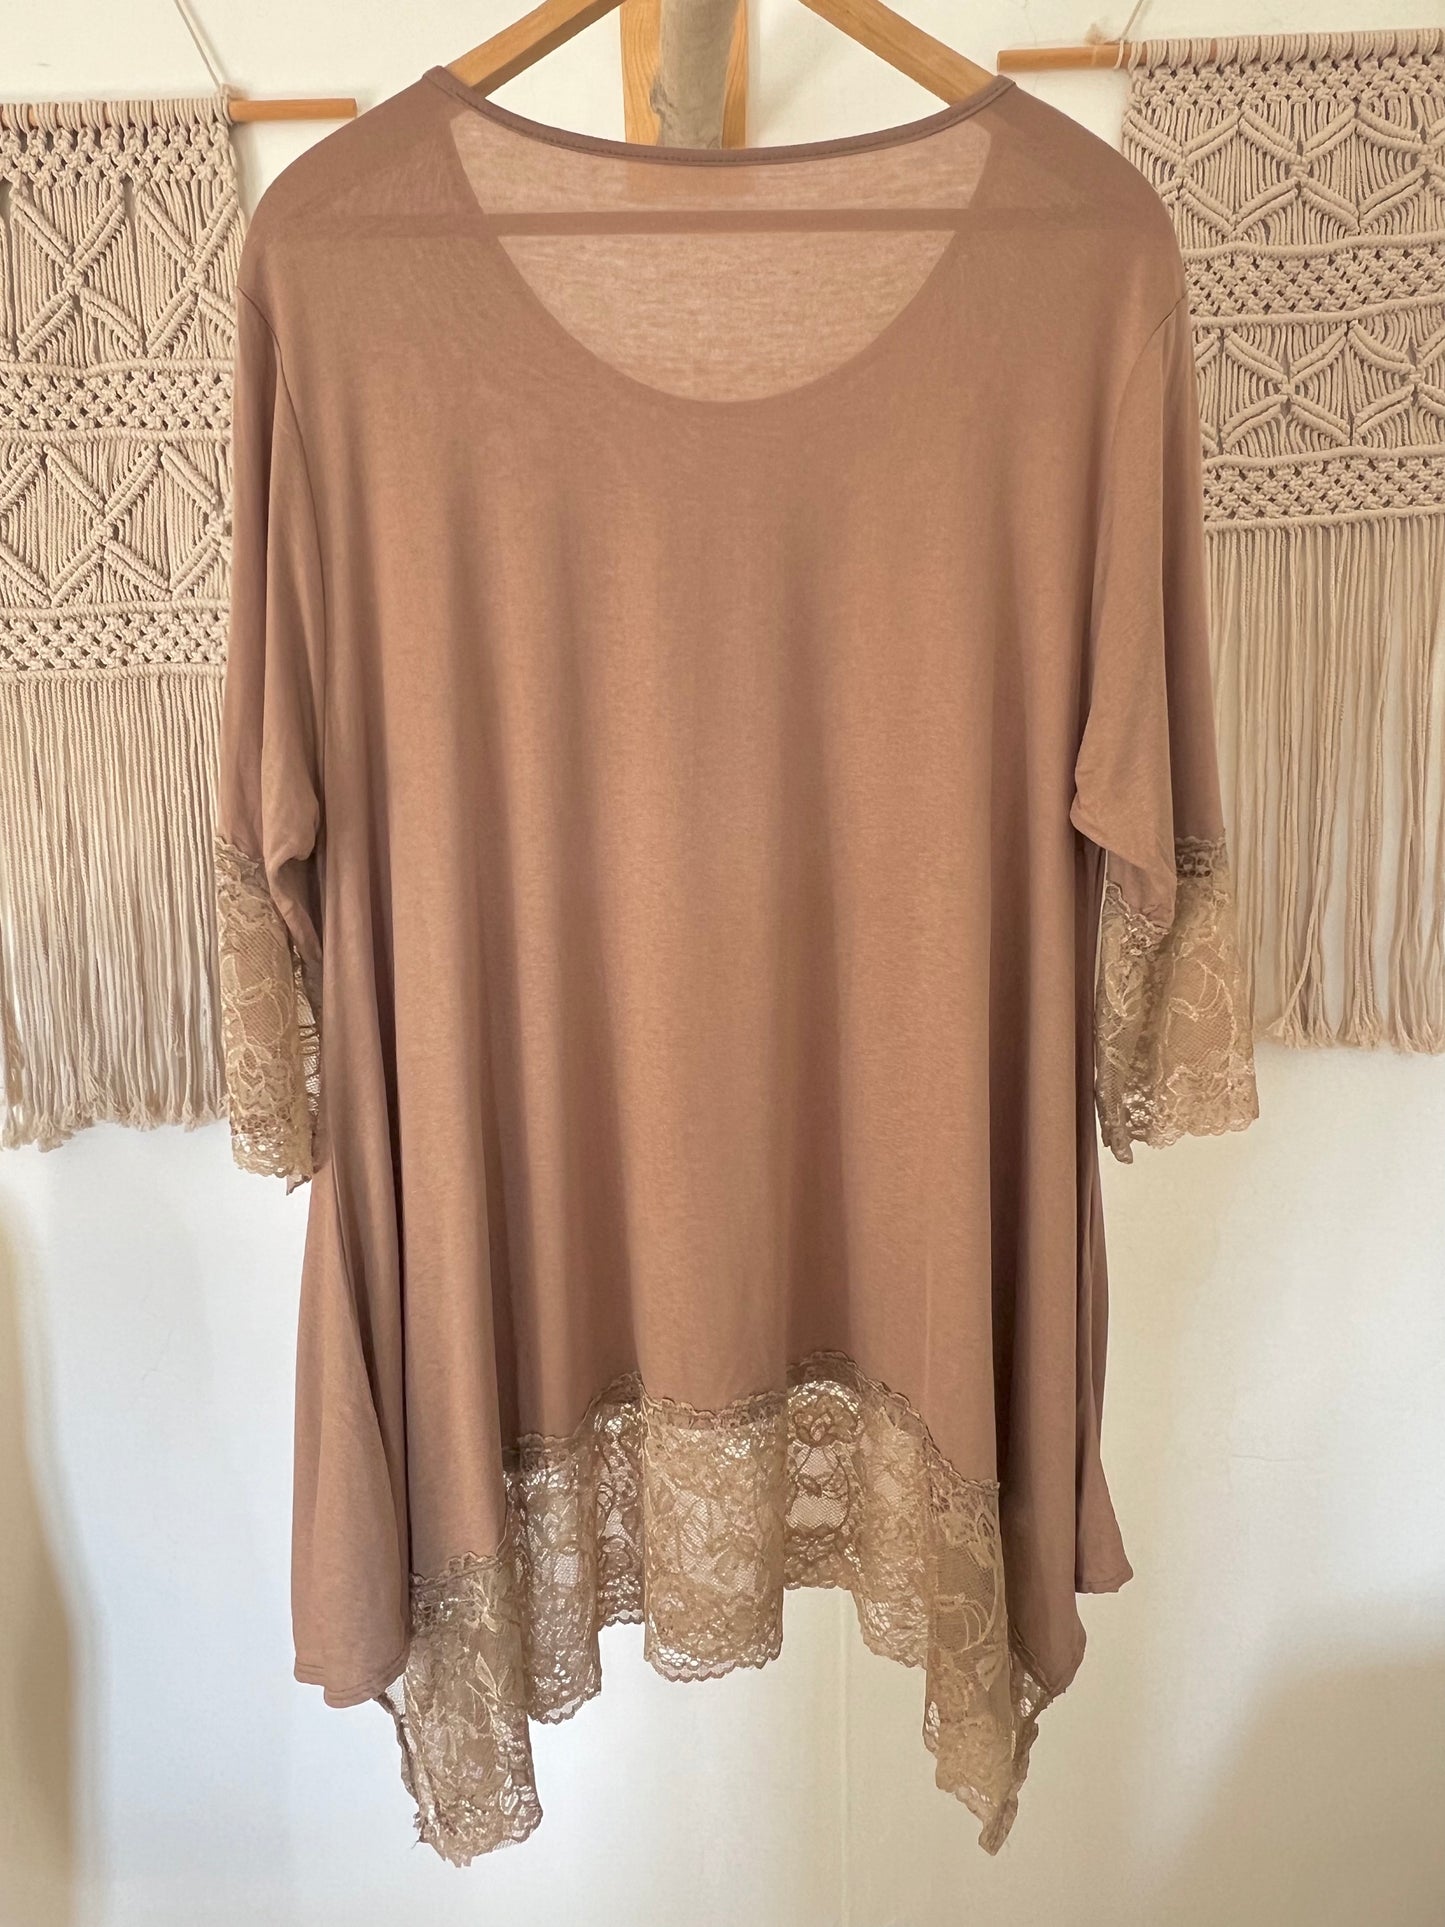 CINDY - TOP CAMEL TAILLE 46 A 56/58